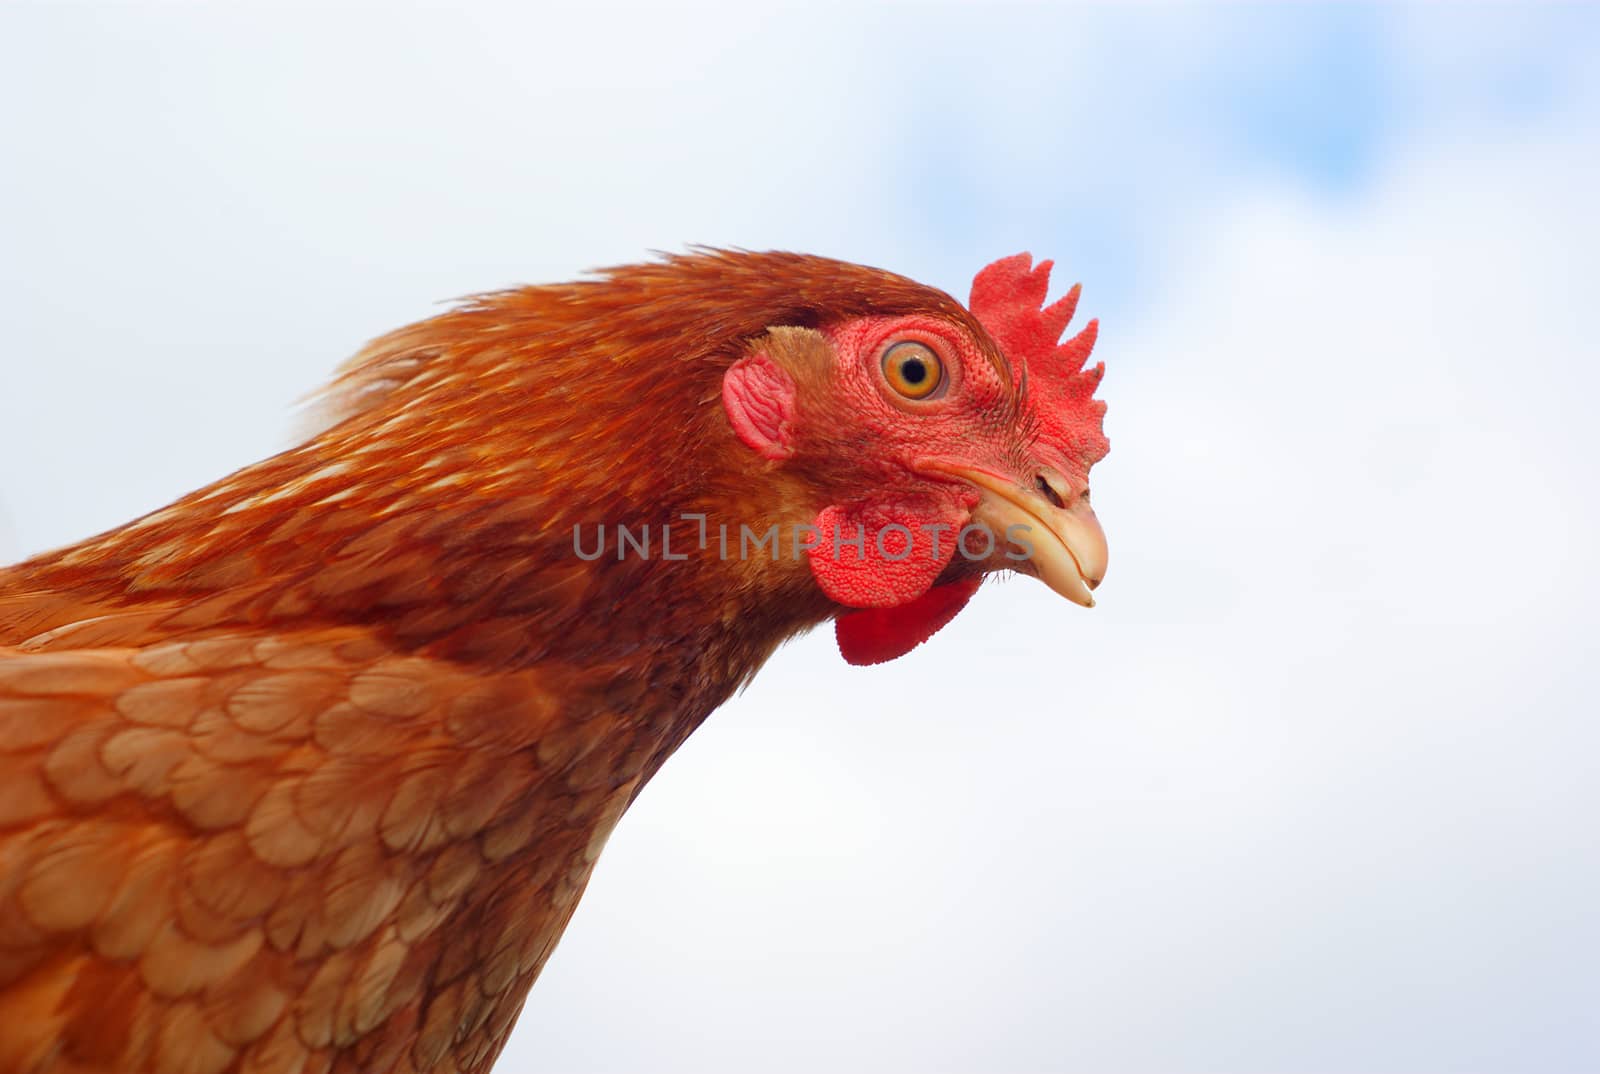 brown chicken hen profile view on cloudy sky background